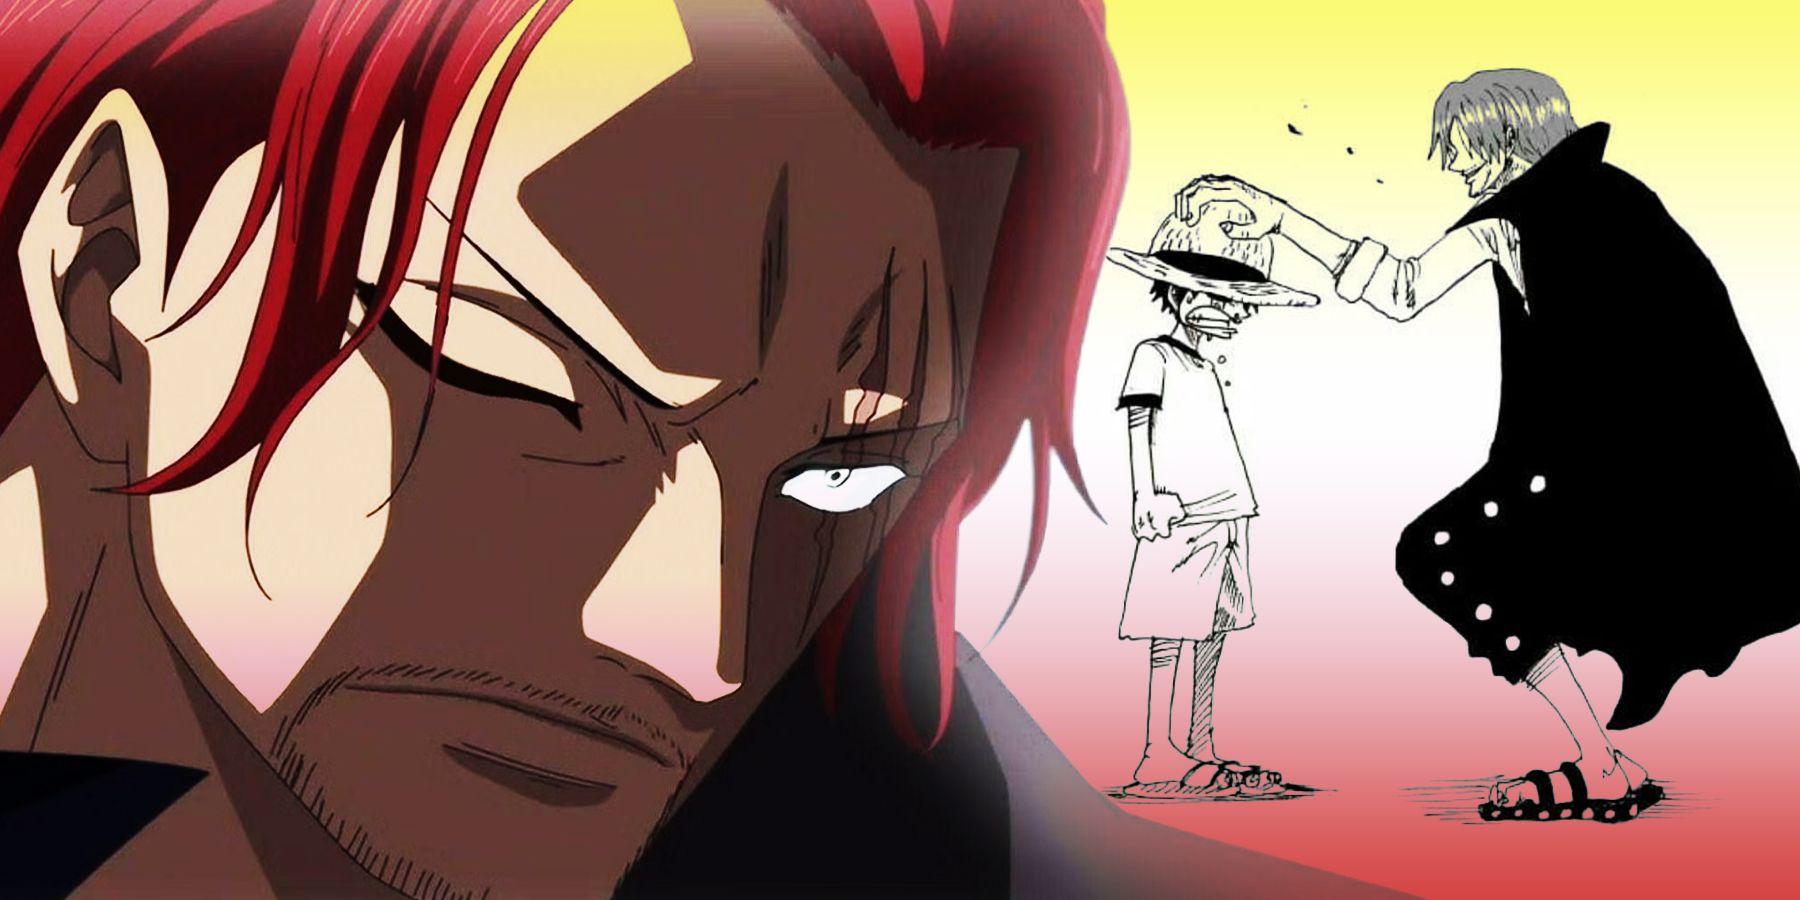 On the left, Shanks glares into the distance. On the right, a manga illustration shows Shanks putting his straw hat on a young Luffy.